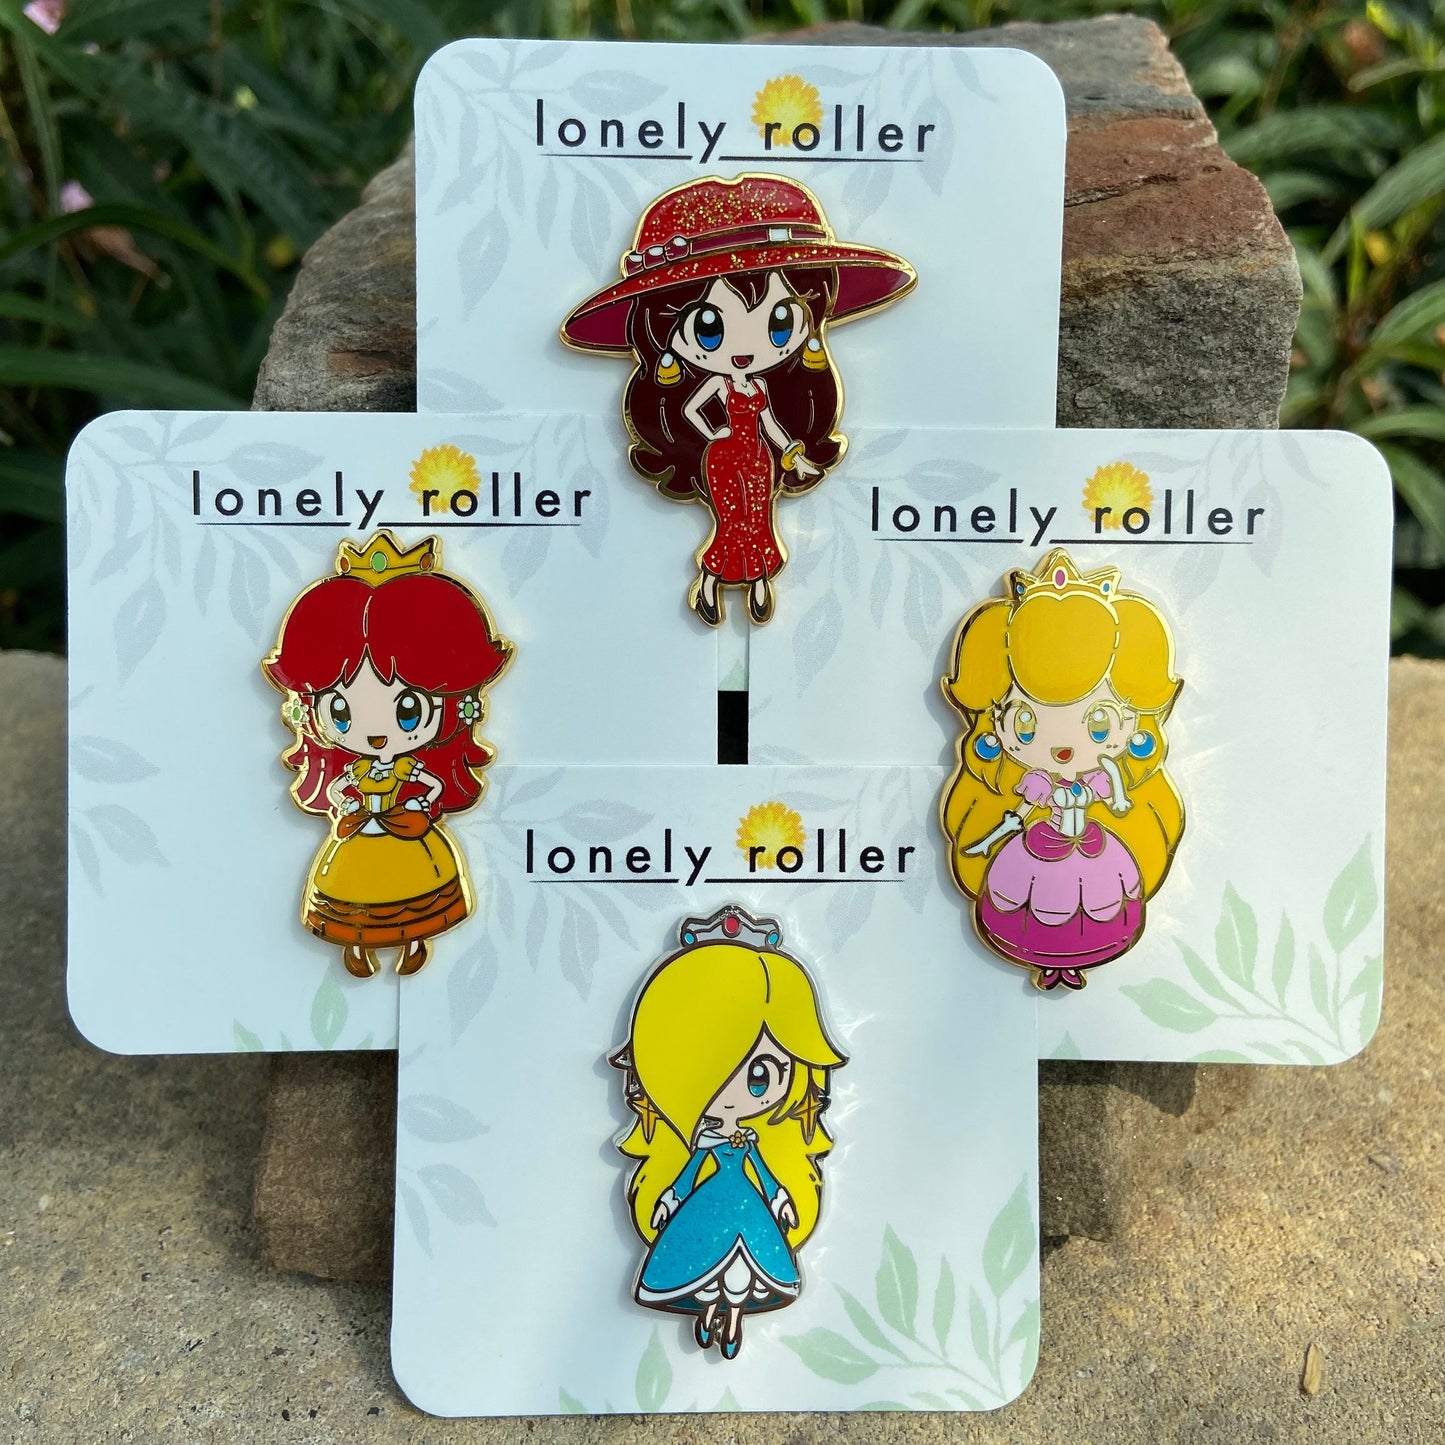 Super Mario Princesses Hard Enamel Pin on Backing Card with "lonely roller" text